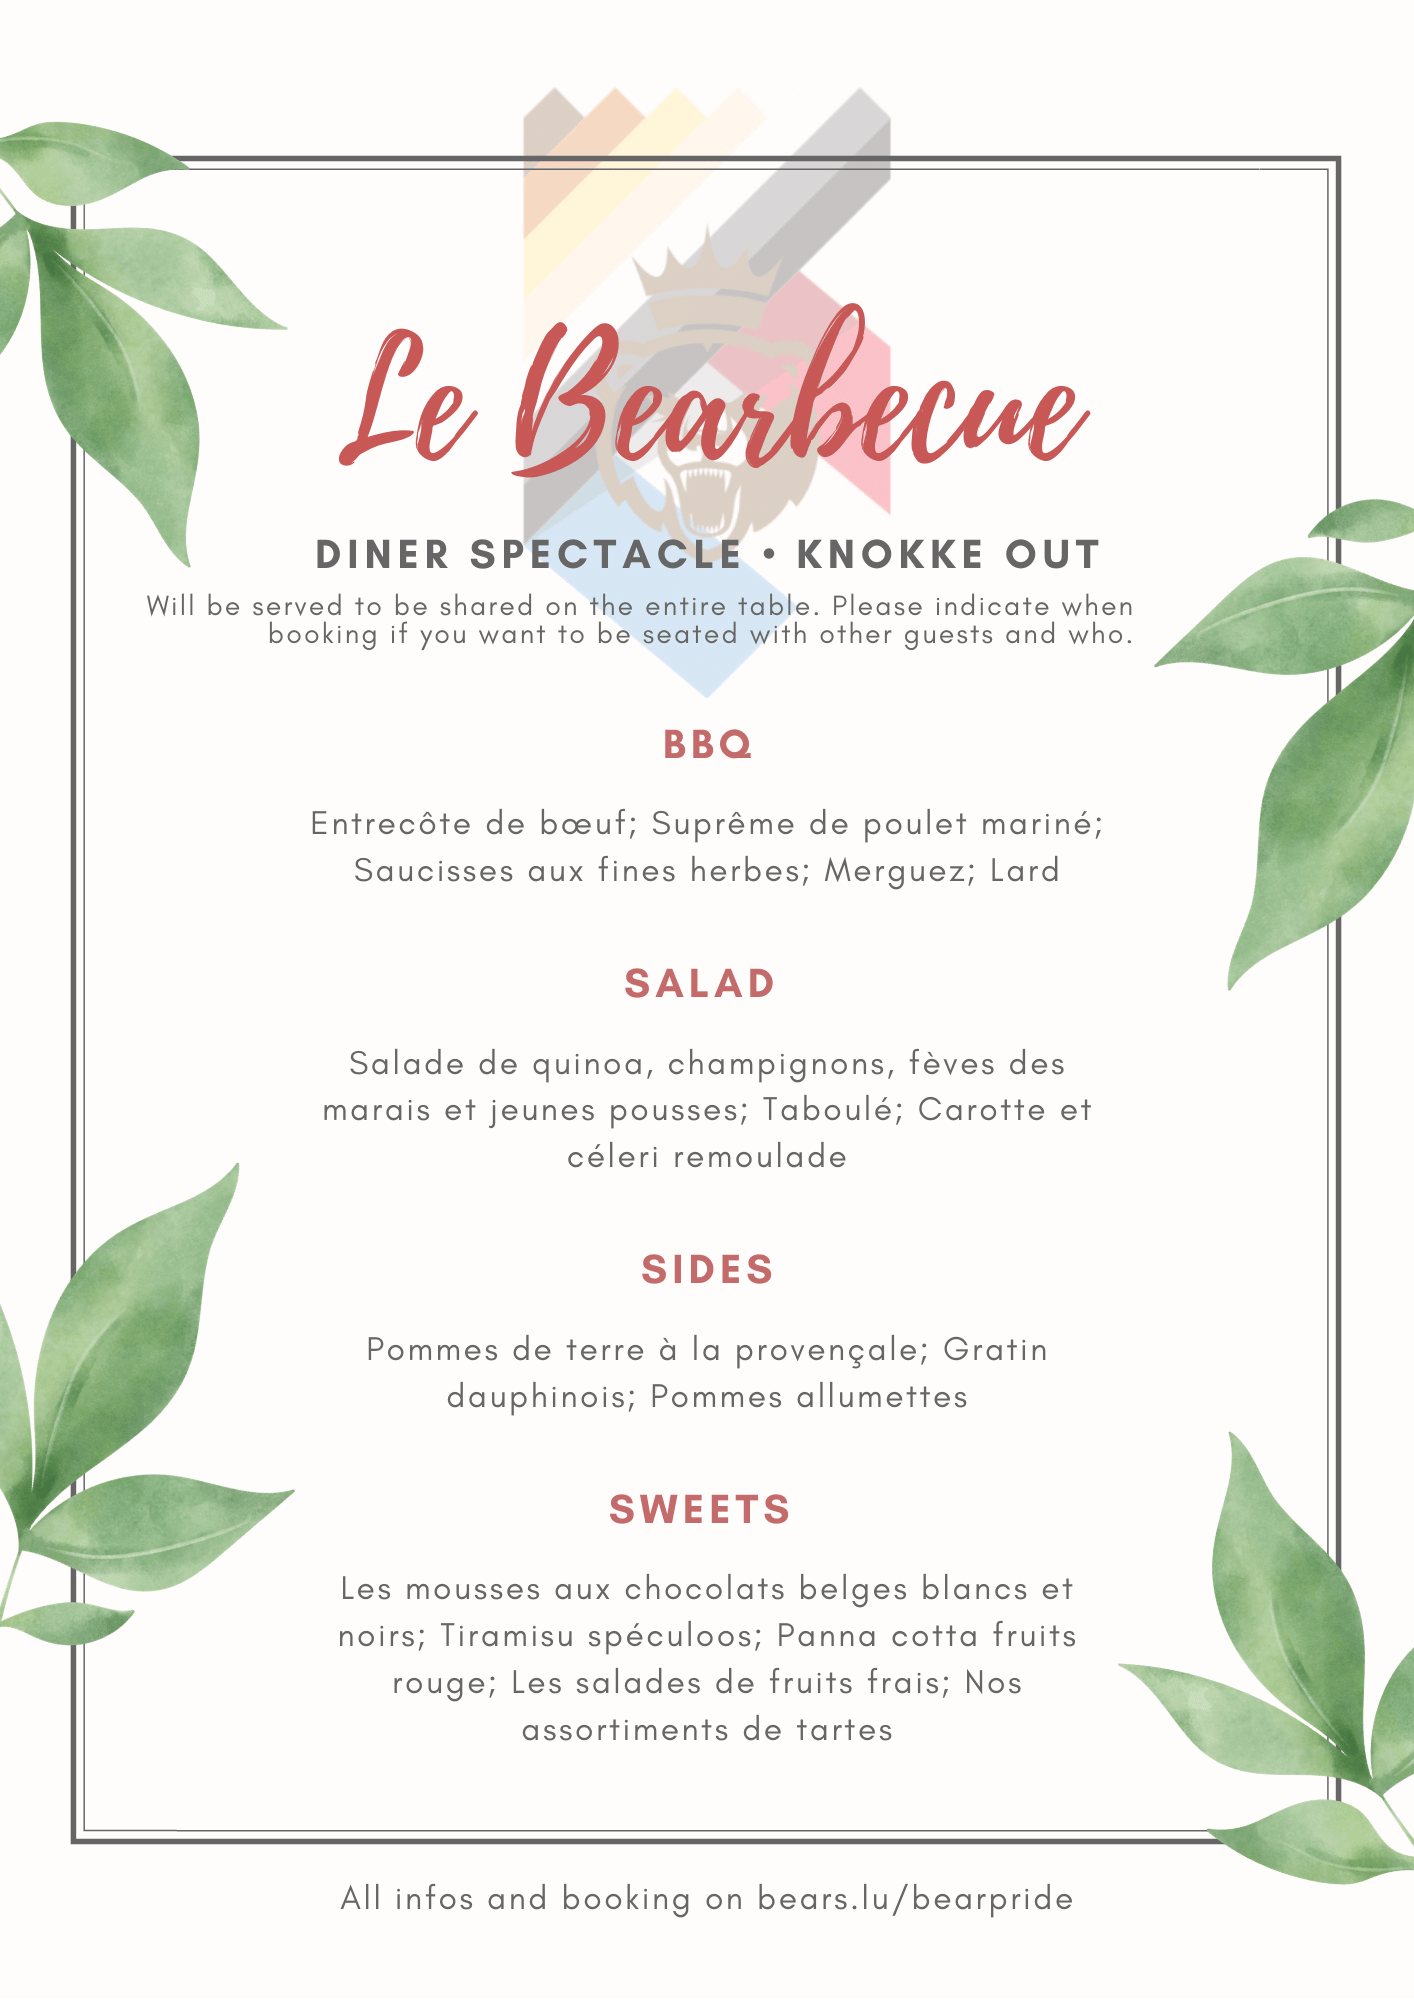 menu of the bearbecue